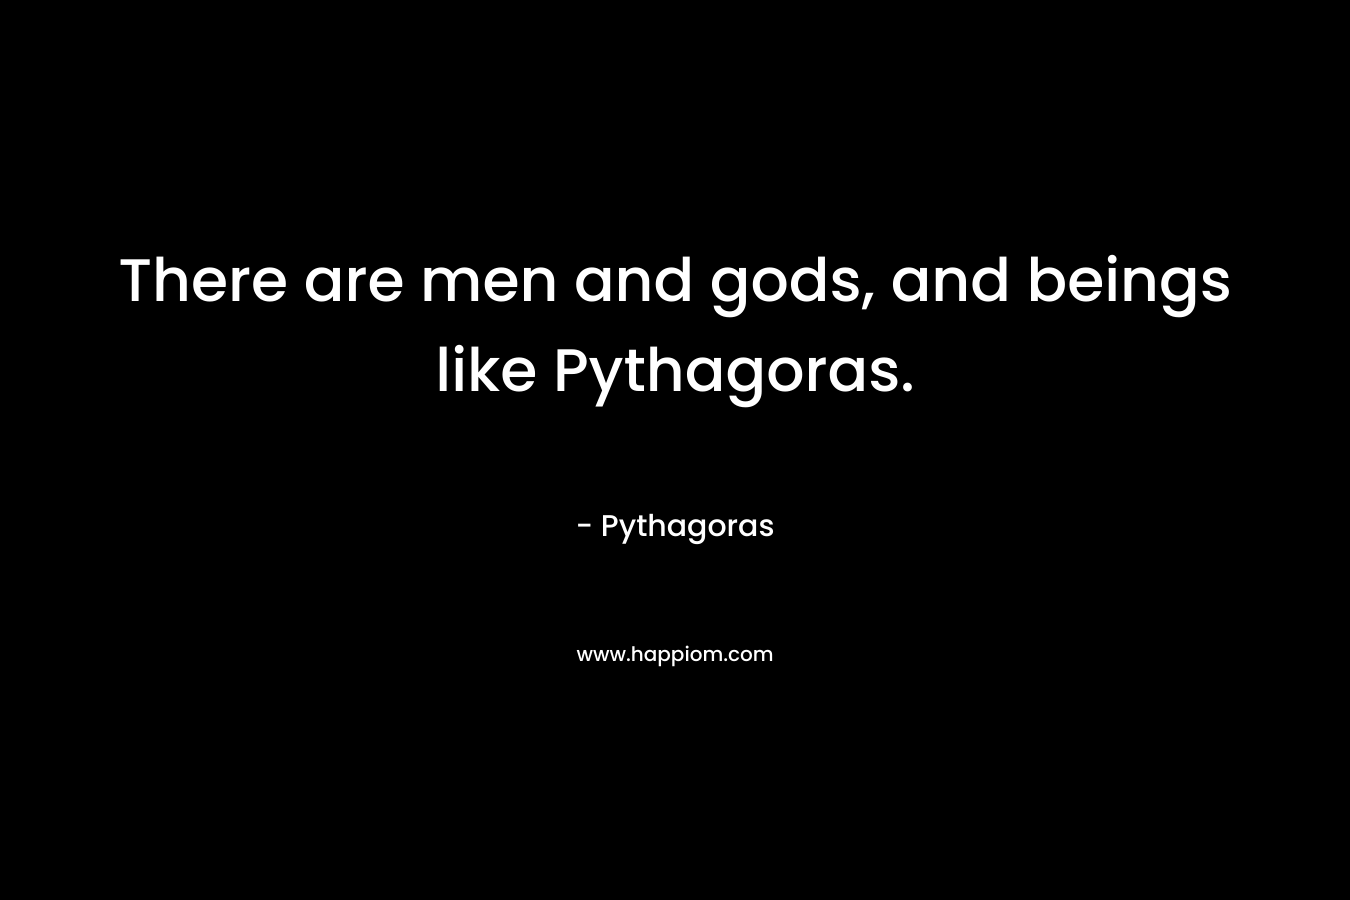 There are men and gods, and beings like Pythagoras.